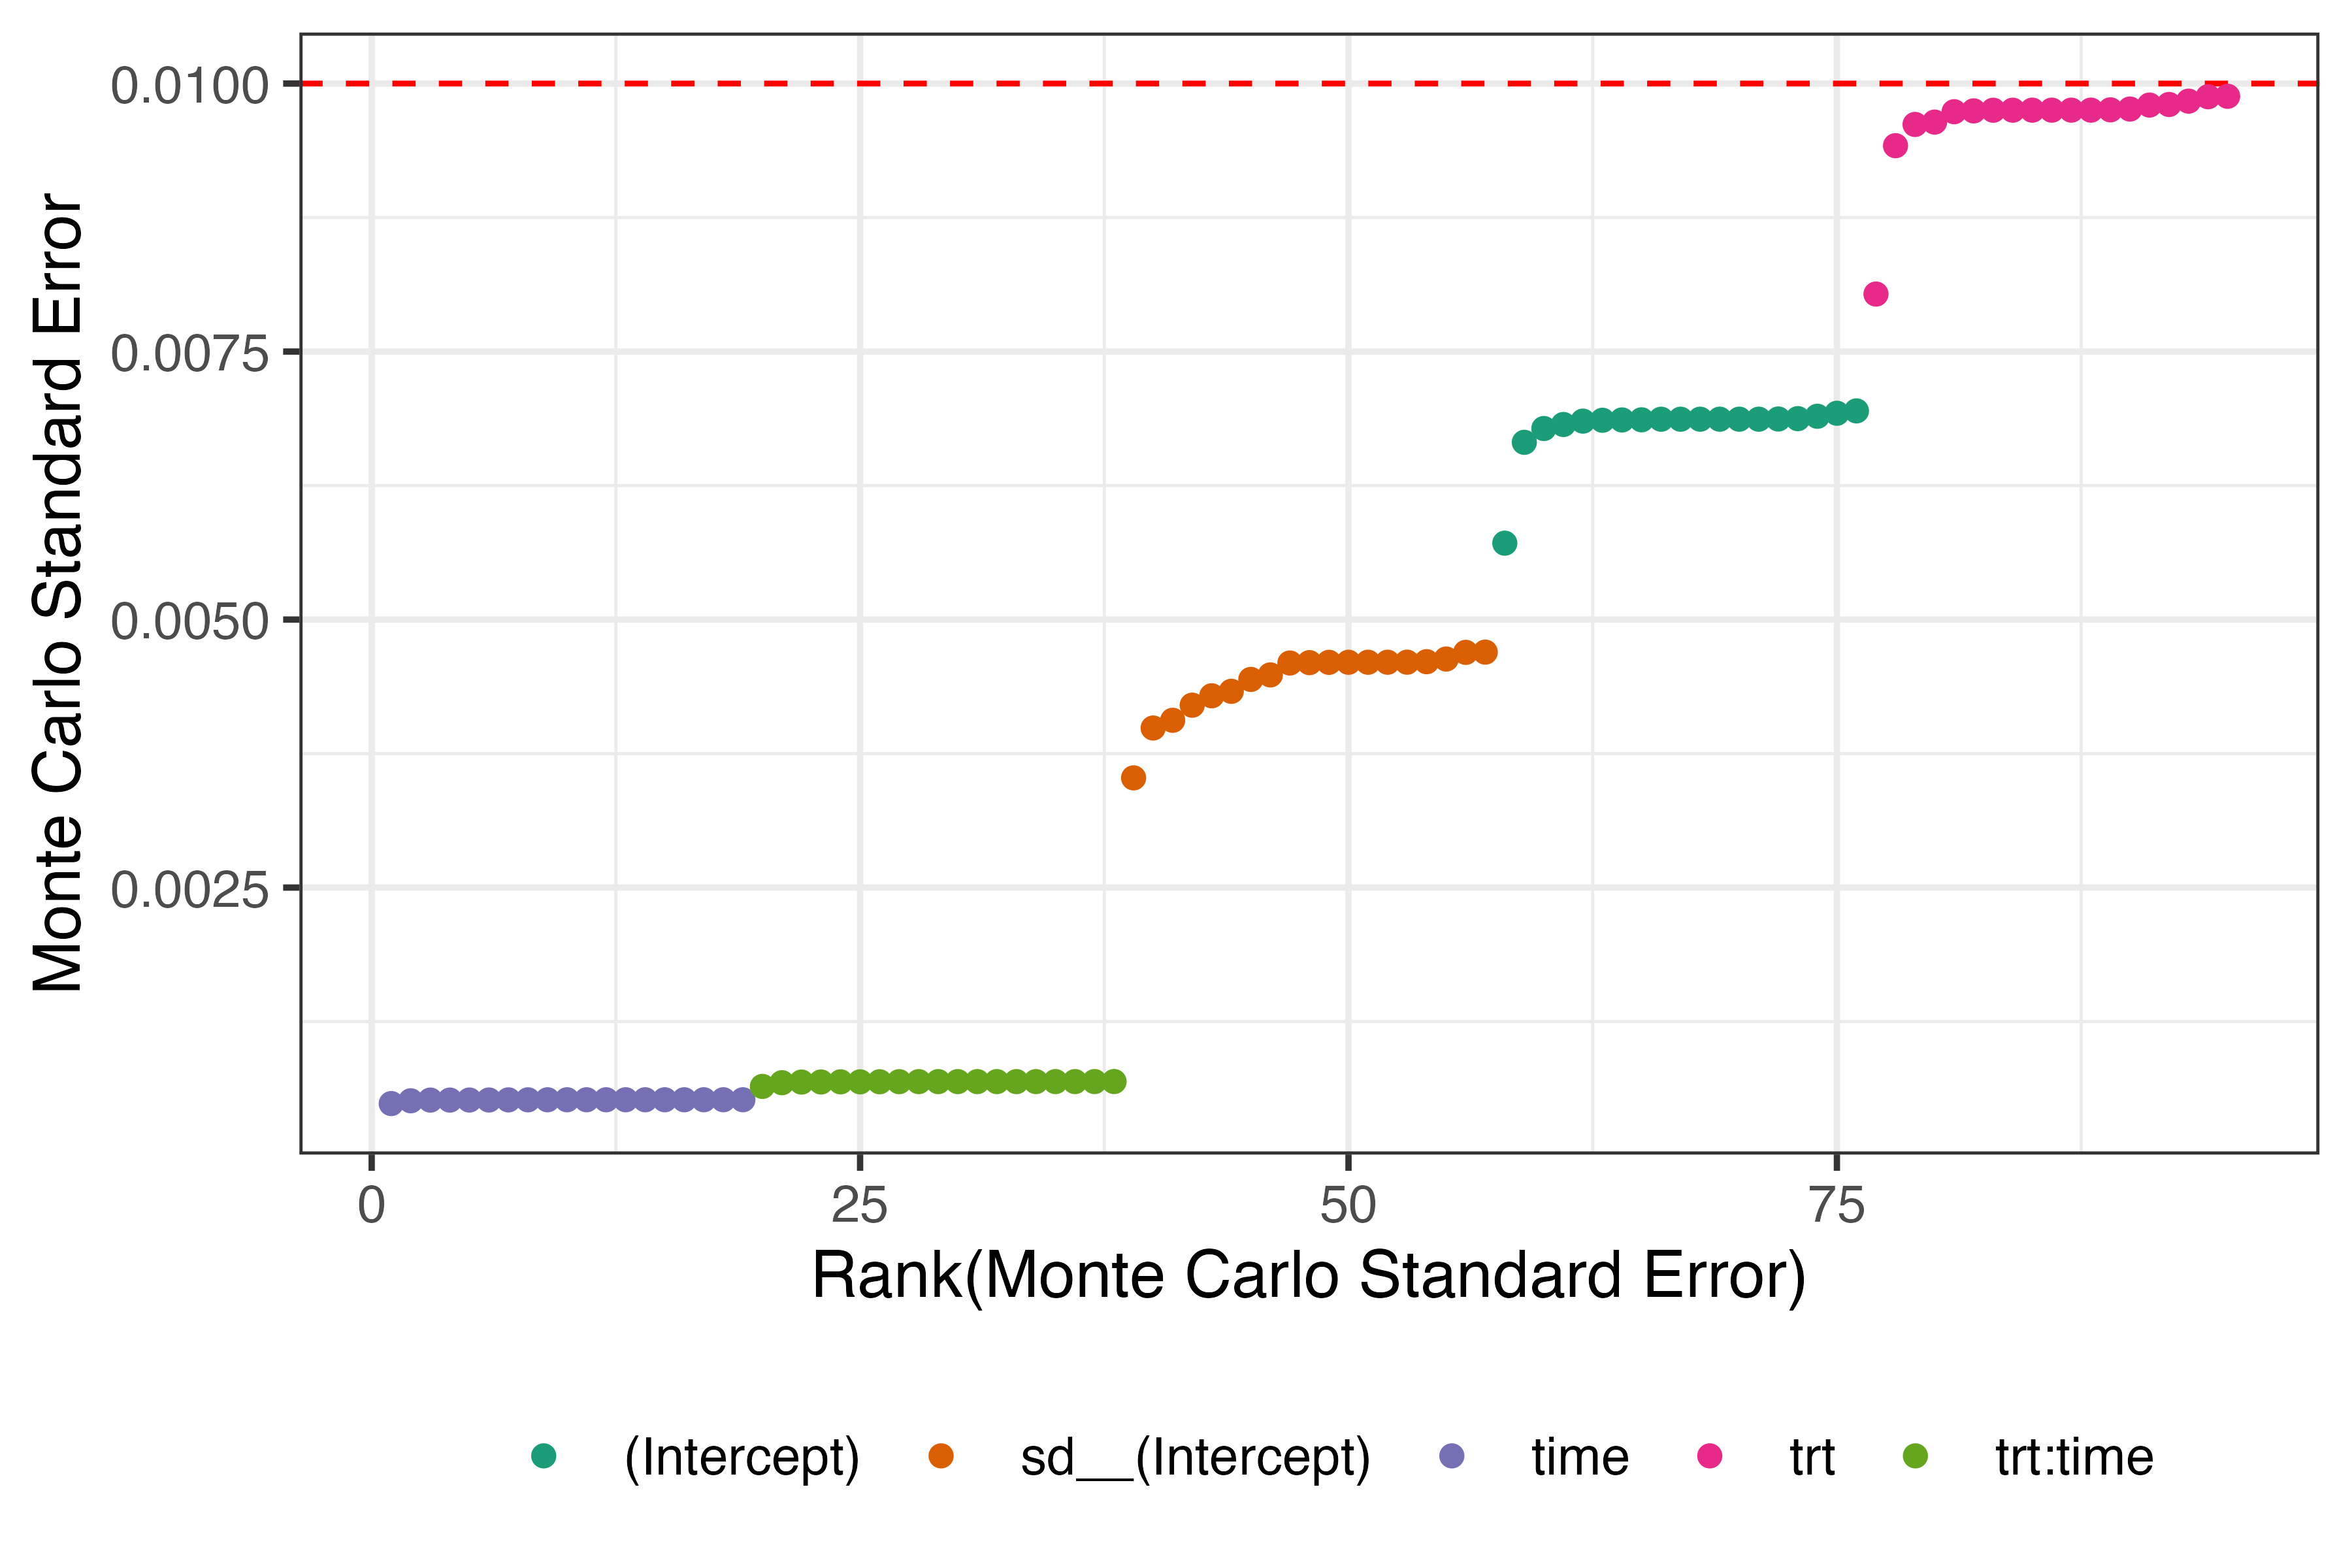 Monte Carlo standard errors for all estimands, to assess convergence.